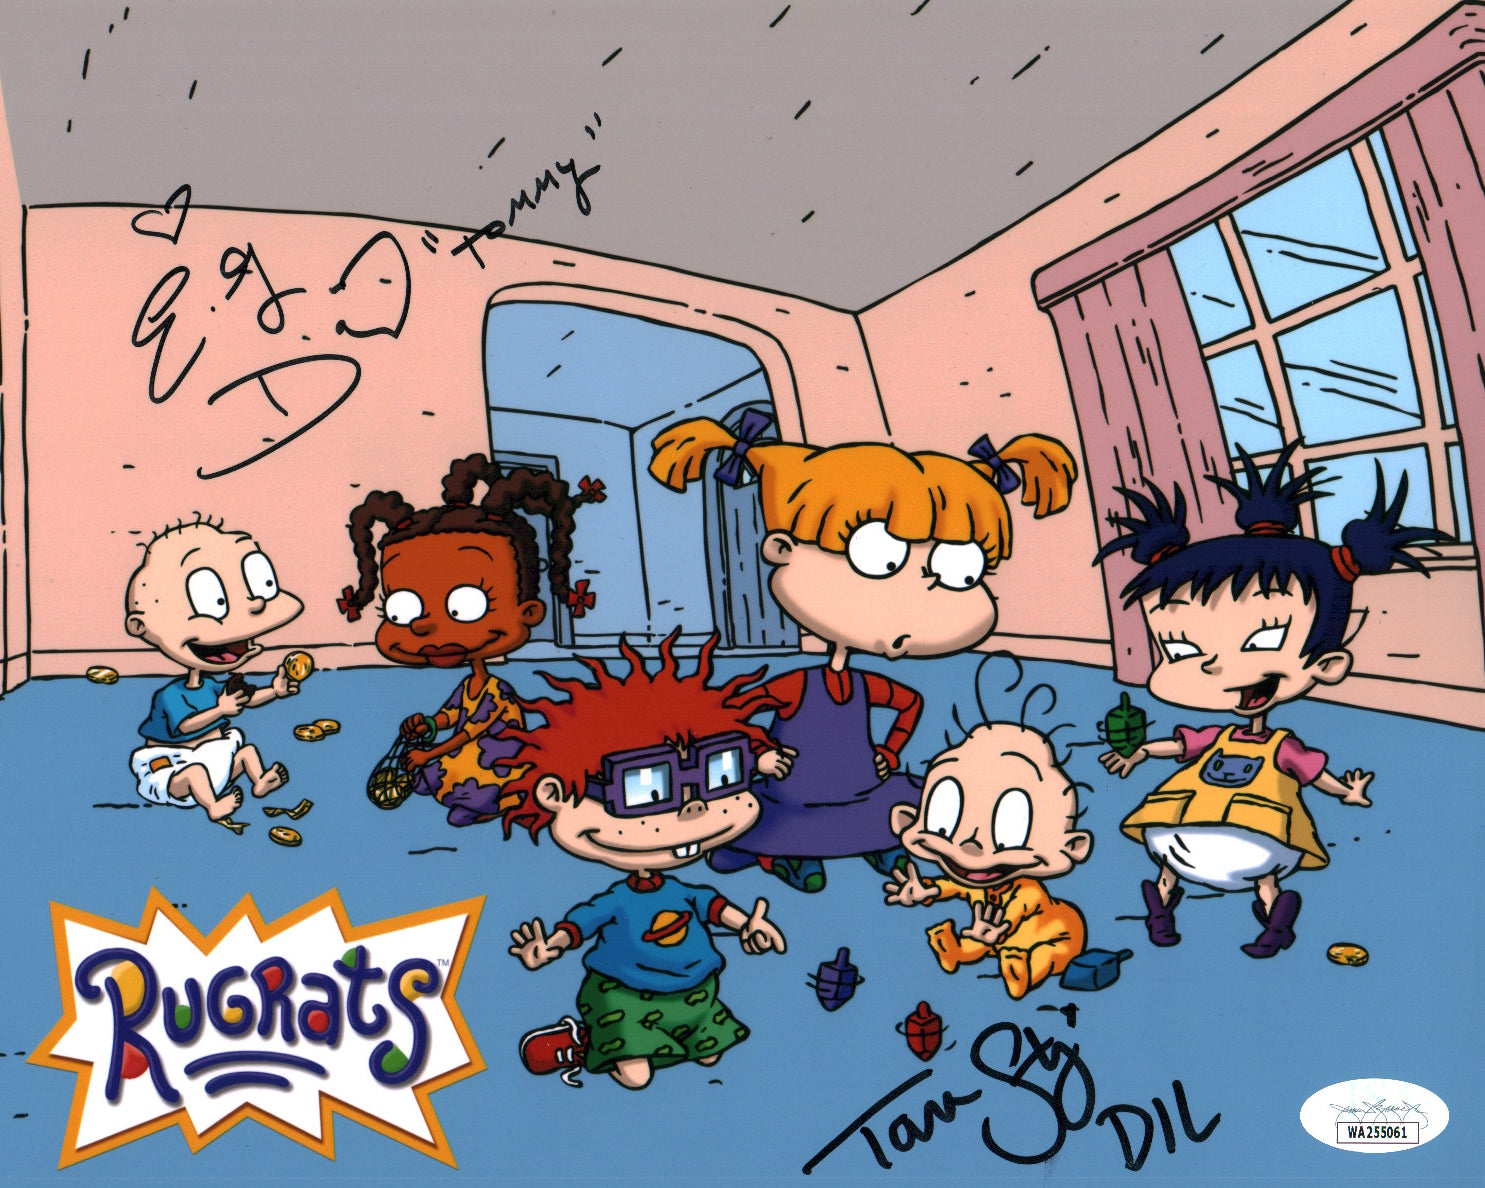 Rugrats 8x10 Signed Photo Daily Strong JSA COA Certified Autograph